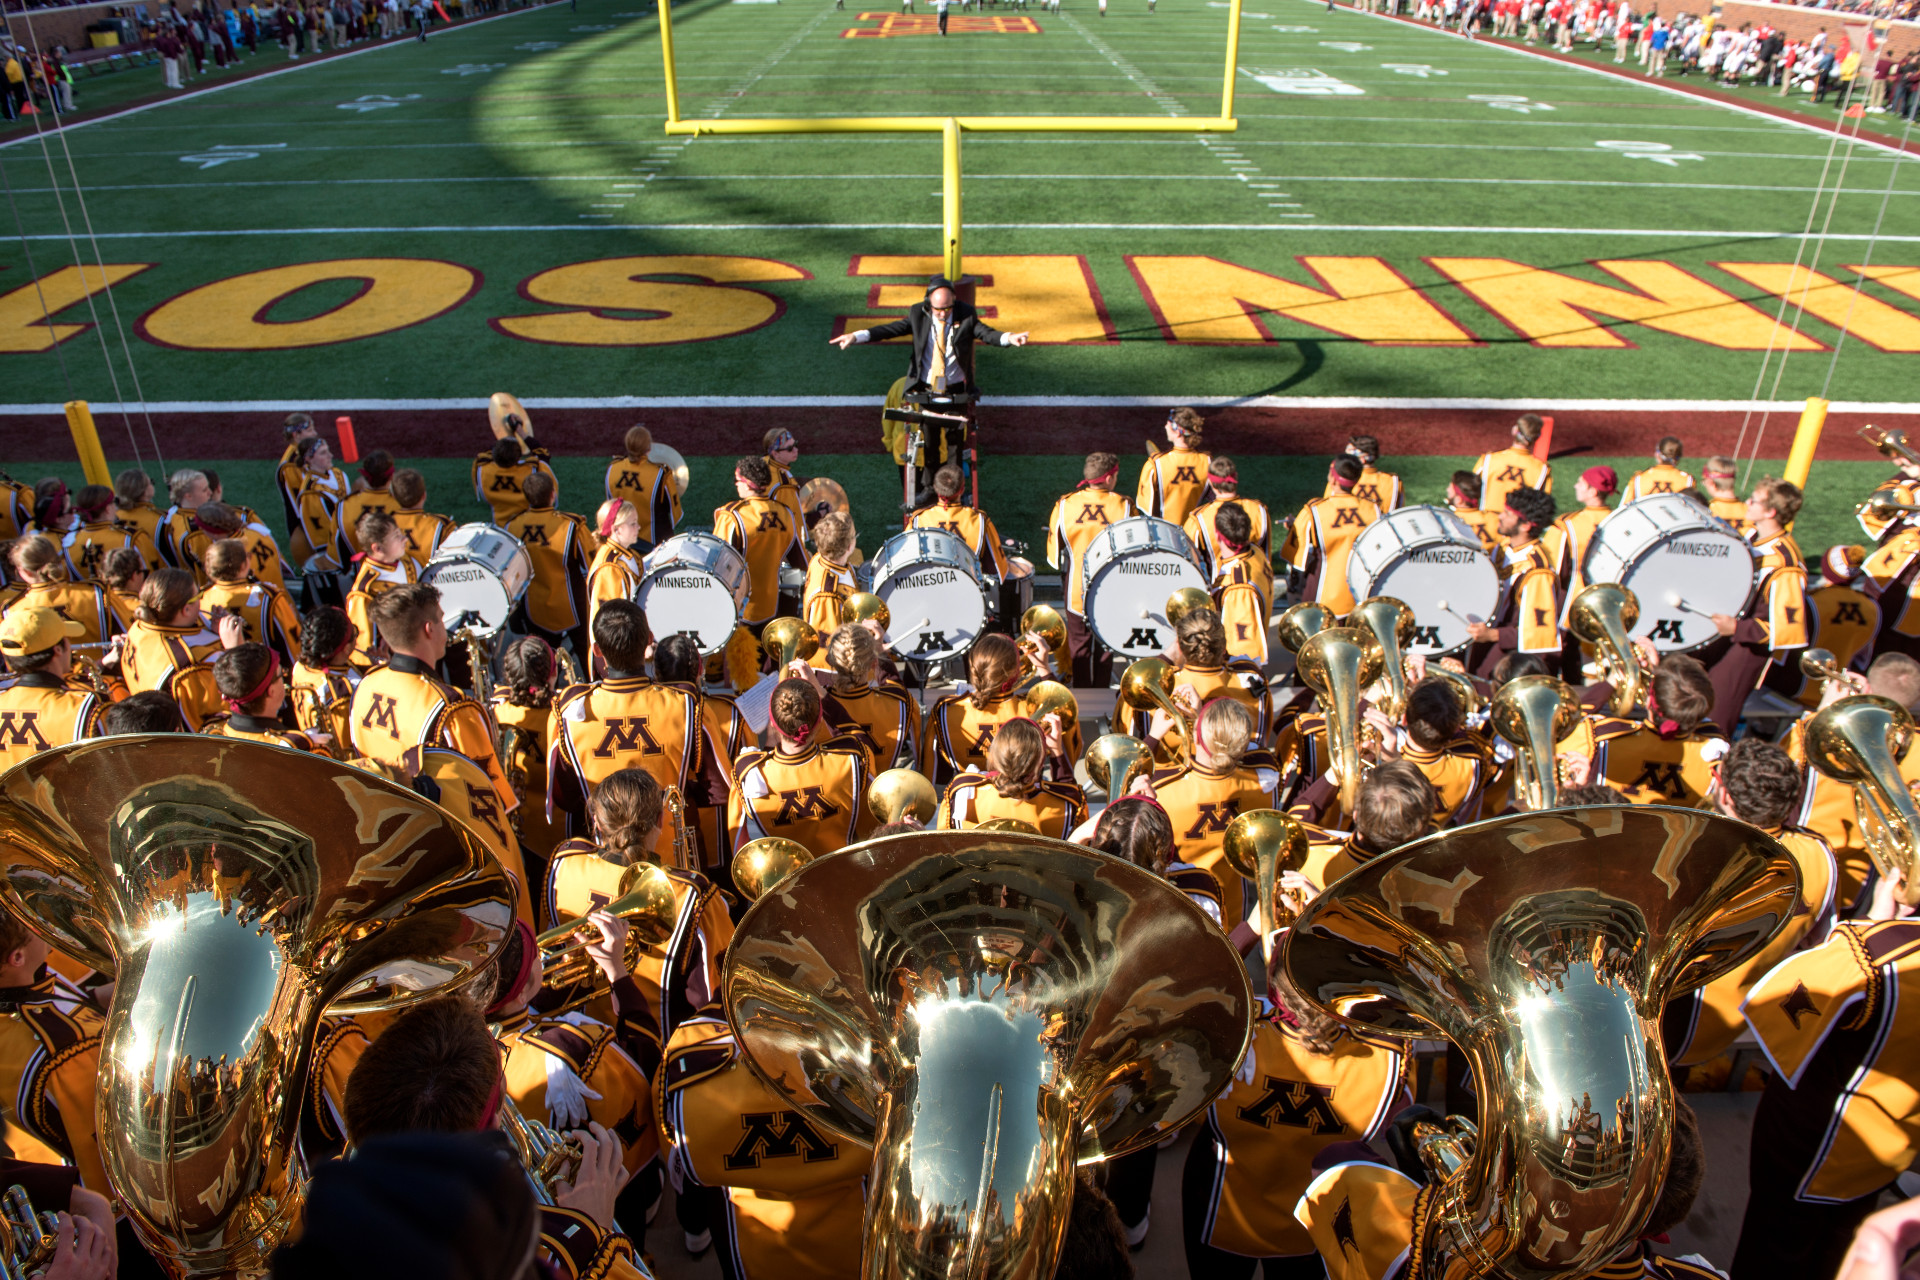 University of Minnesota Marching Band in the stands on Gameday